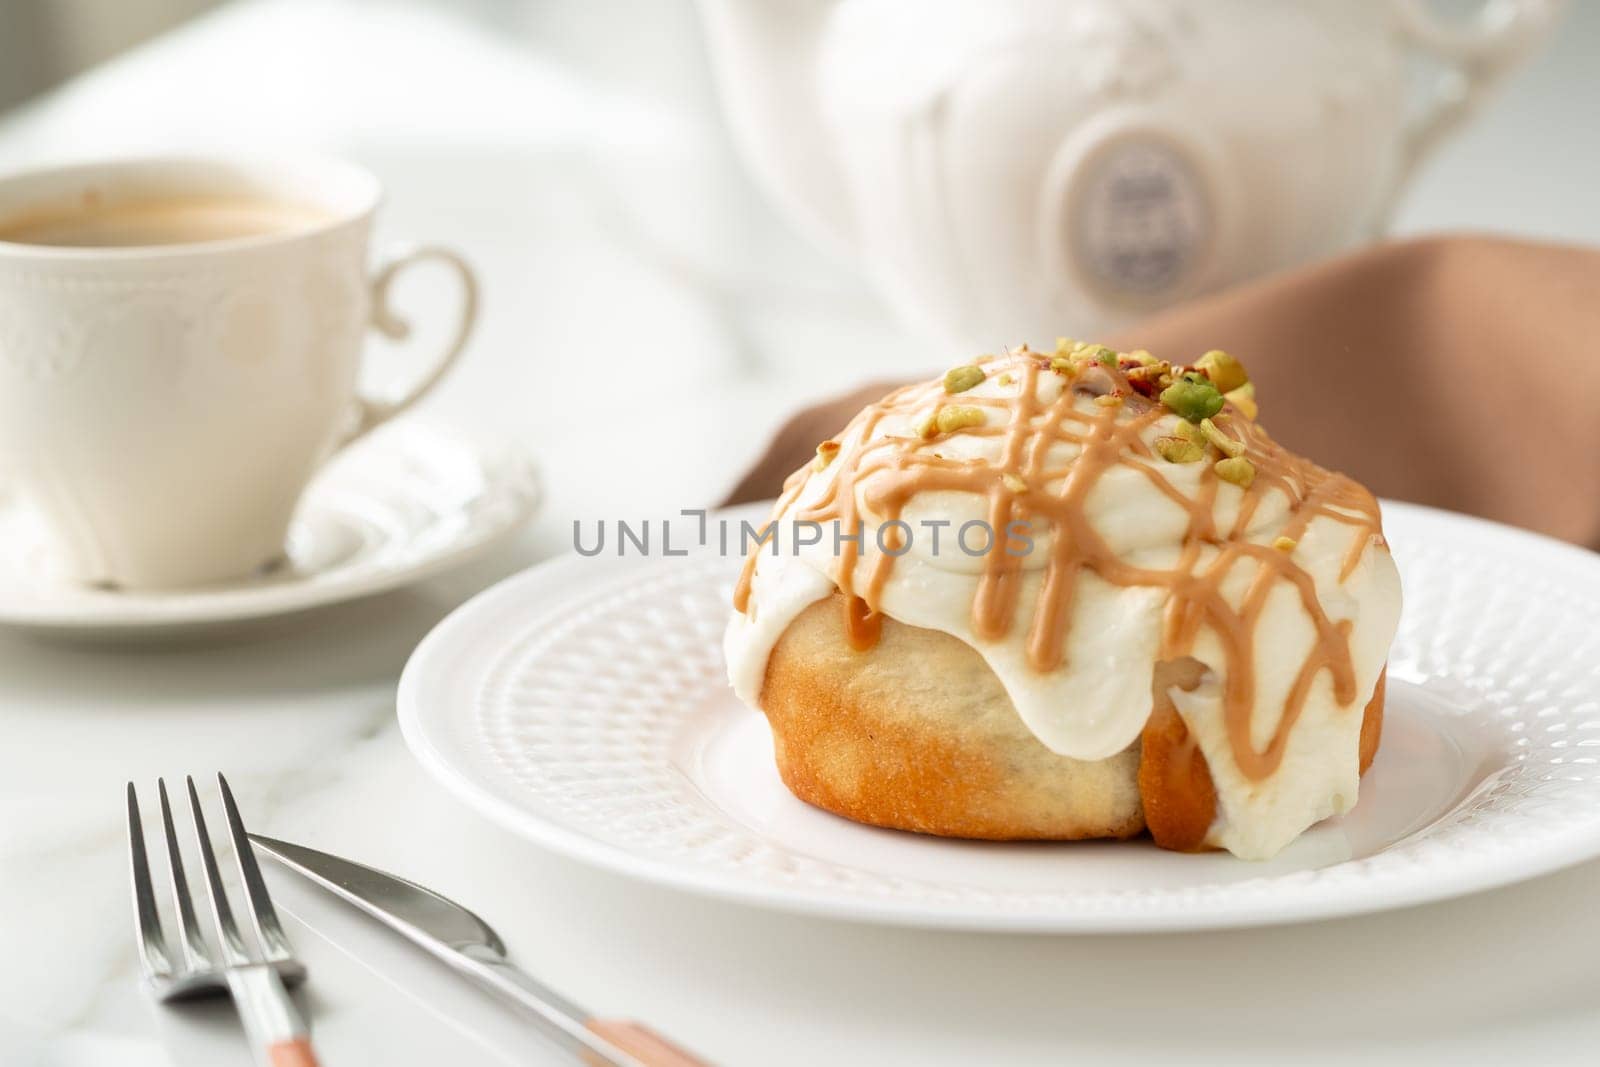 Cinnamon roll bun with icing on plate close up